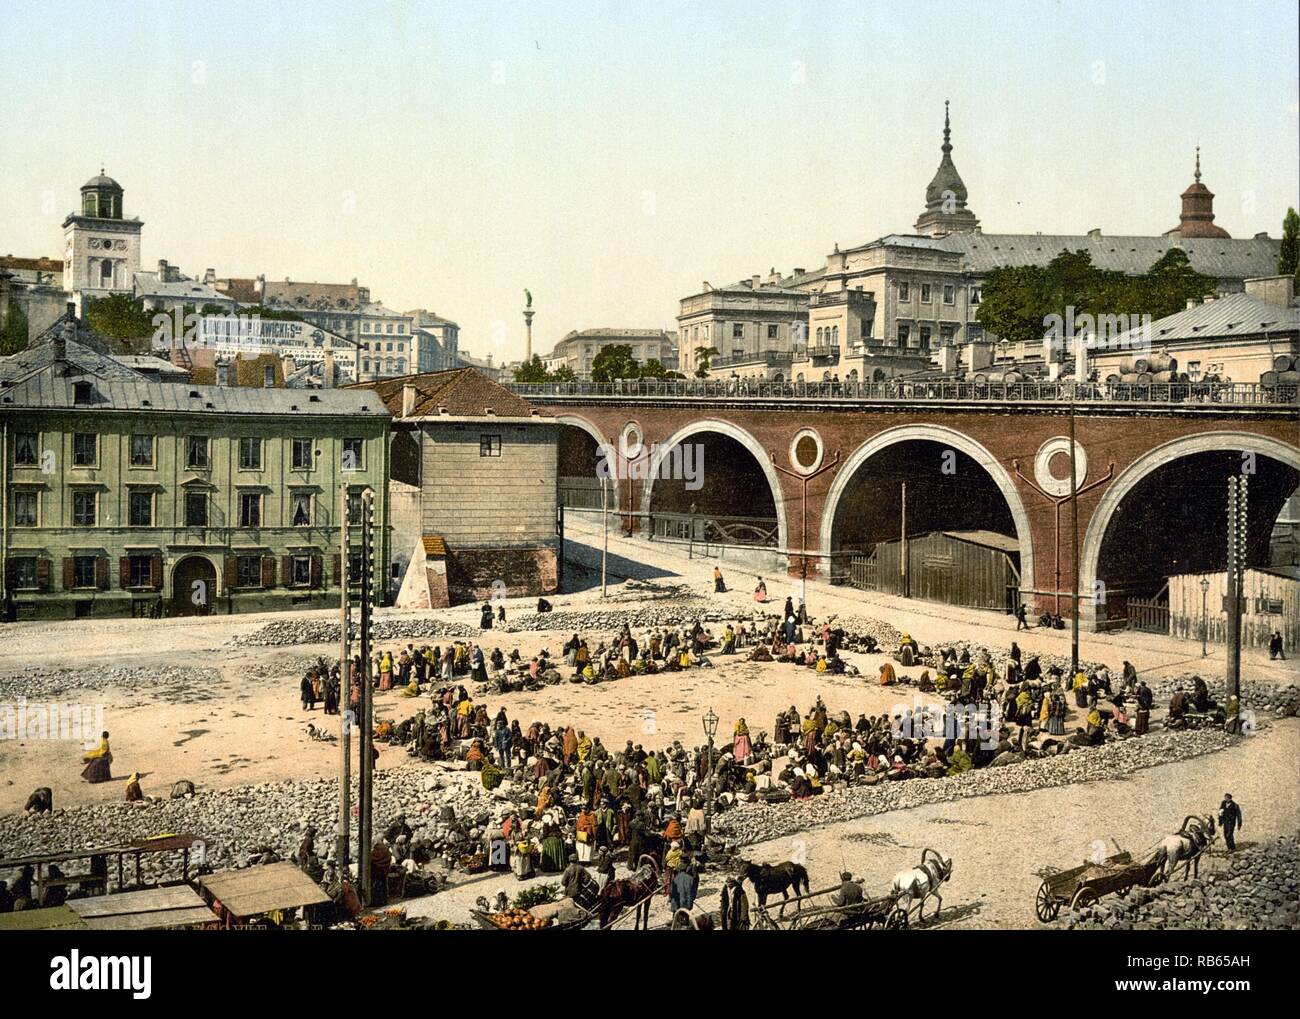 Colour print of Zjazd Street, Warsaw, Russia. Warsaw is now the capital of Poland, since it became an independent country in 1919. The picture is said to be dated around 1890-1900. Stock Photo